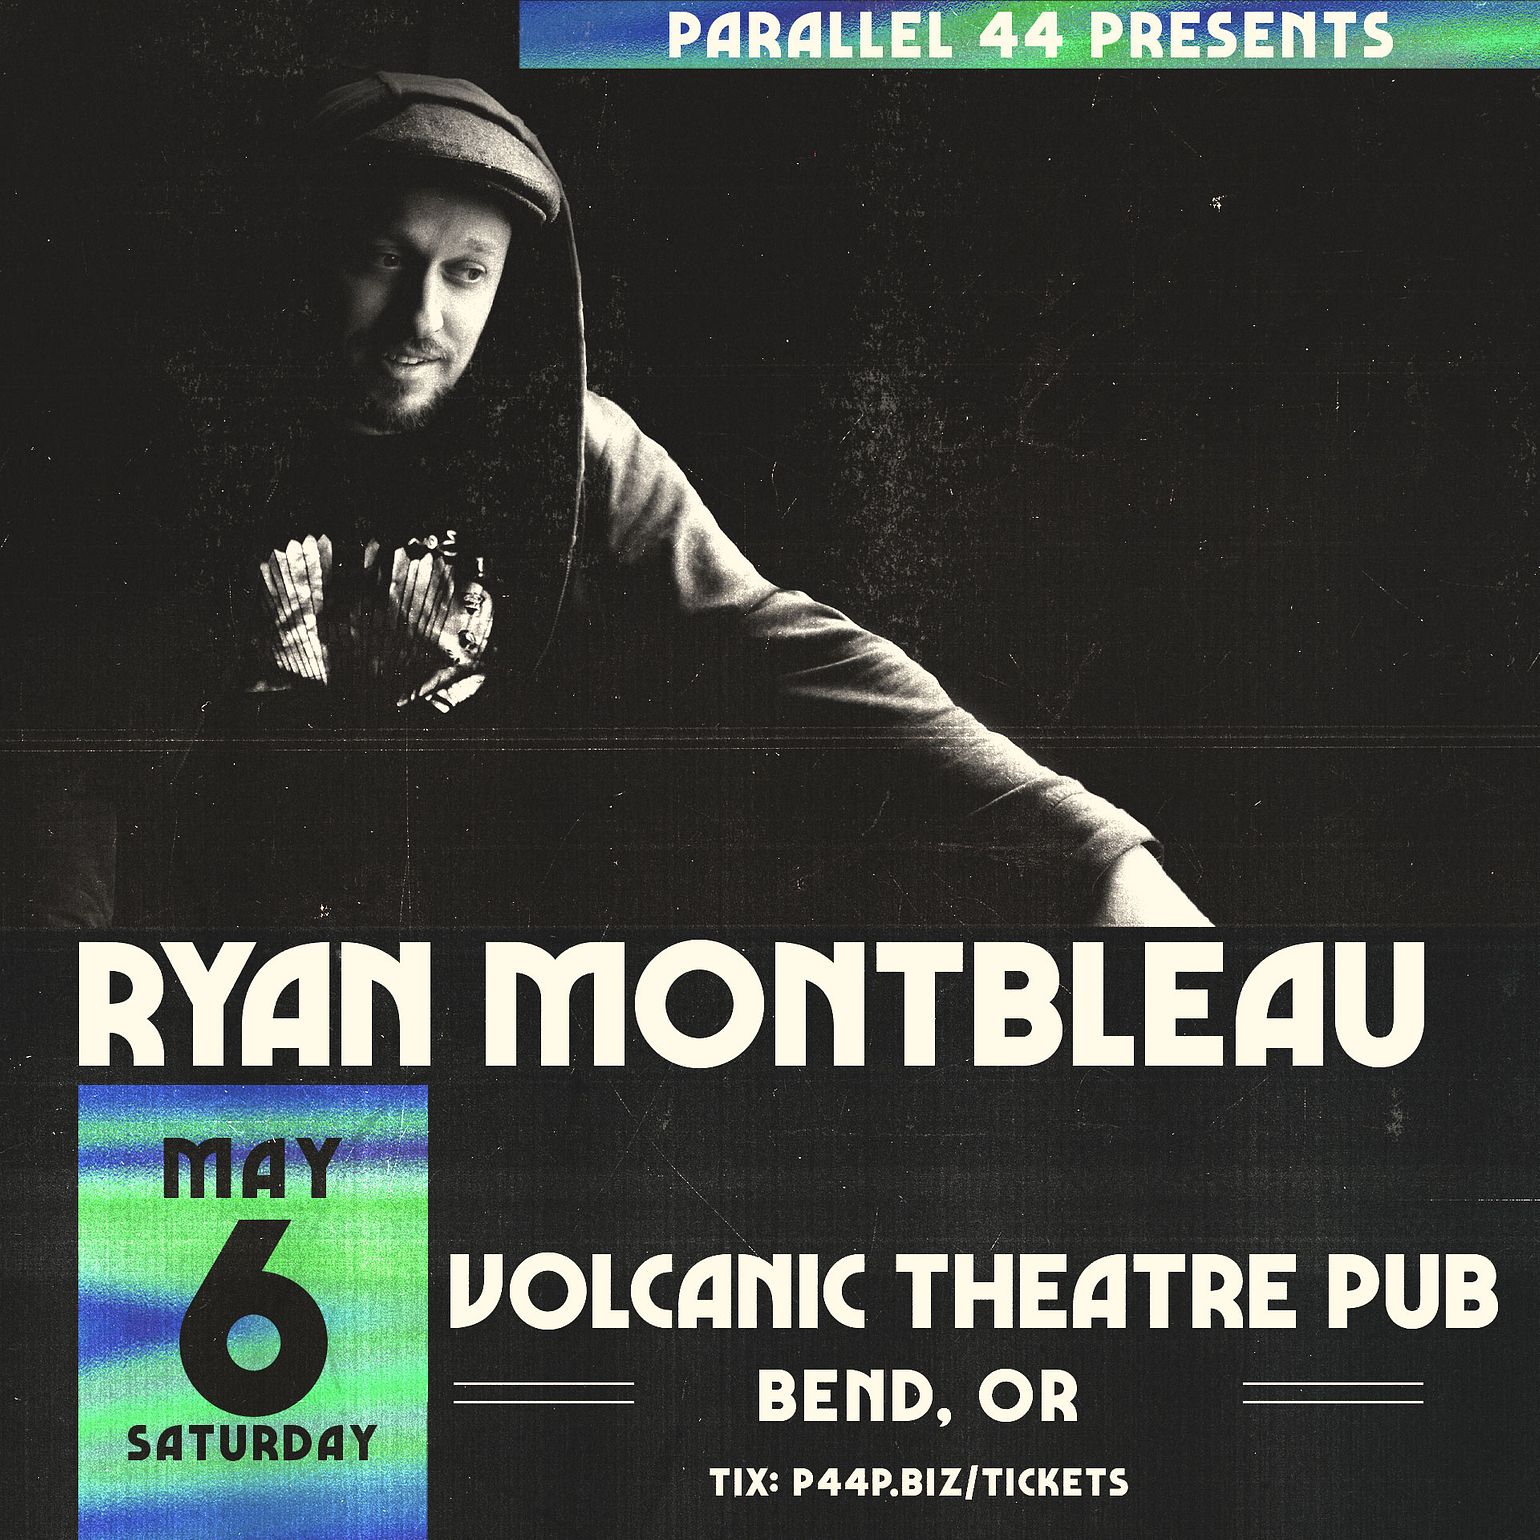 RYAN MONTBLEAU Tickets at Volcanic Theater Pub in Bend by Volcanic